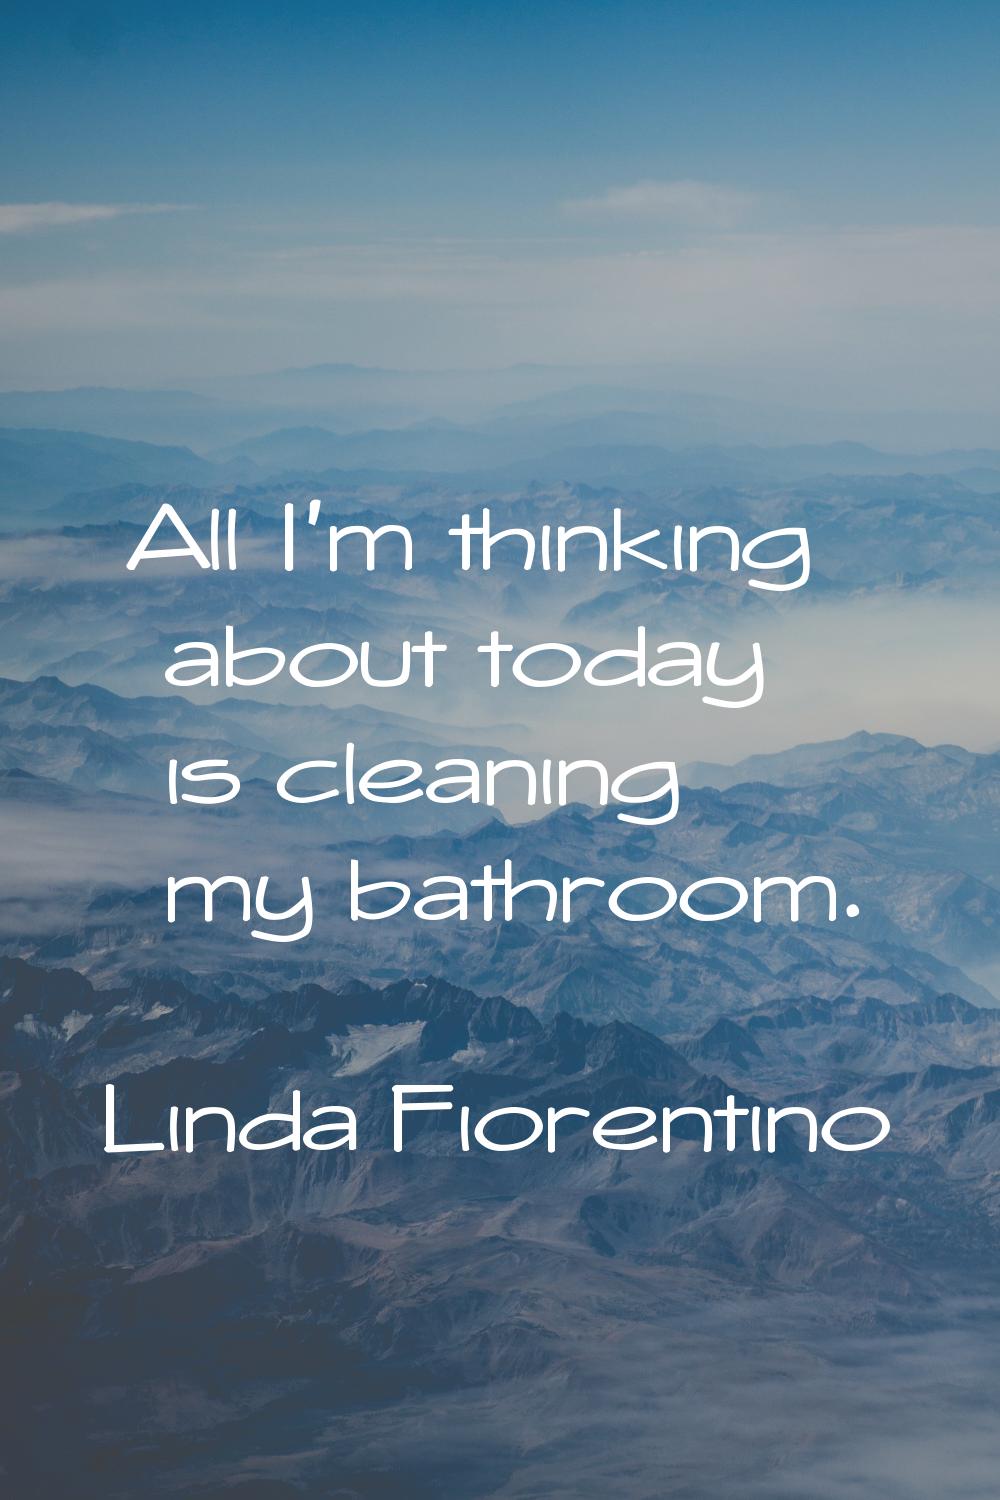 All I'm thinking about today is cleaning my bathroom.